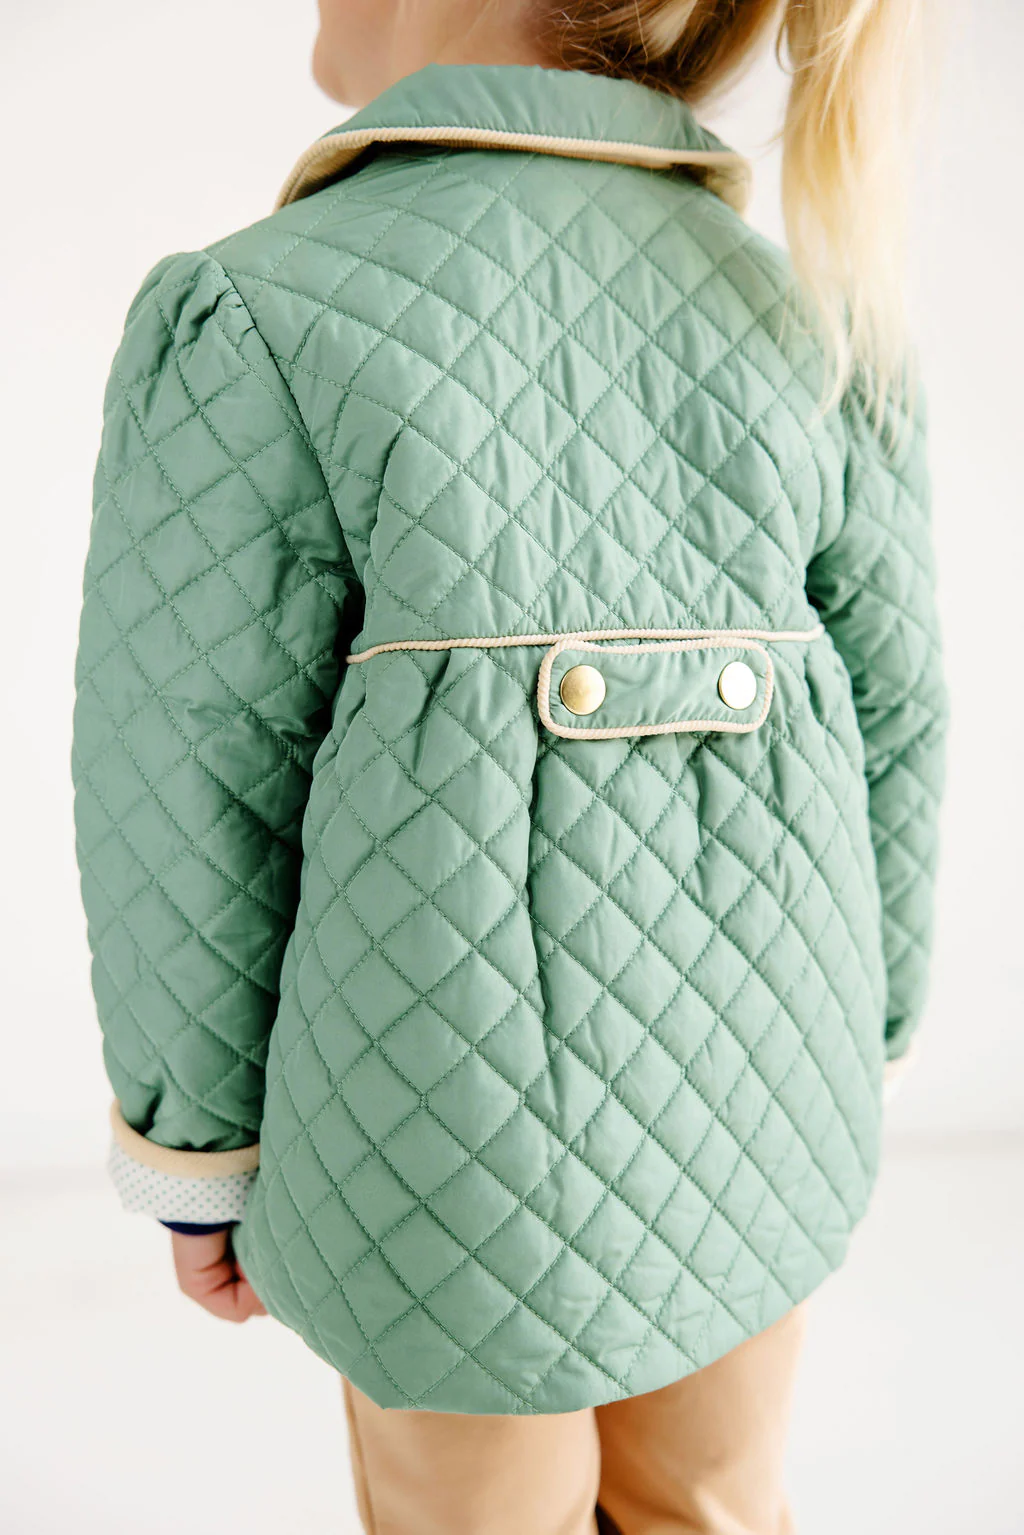 Carlyle Quilted Coat in Gallatin Green with Keeneland Khaki